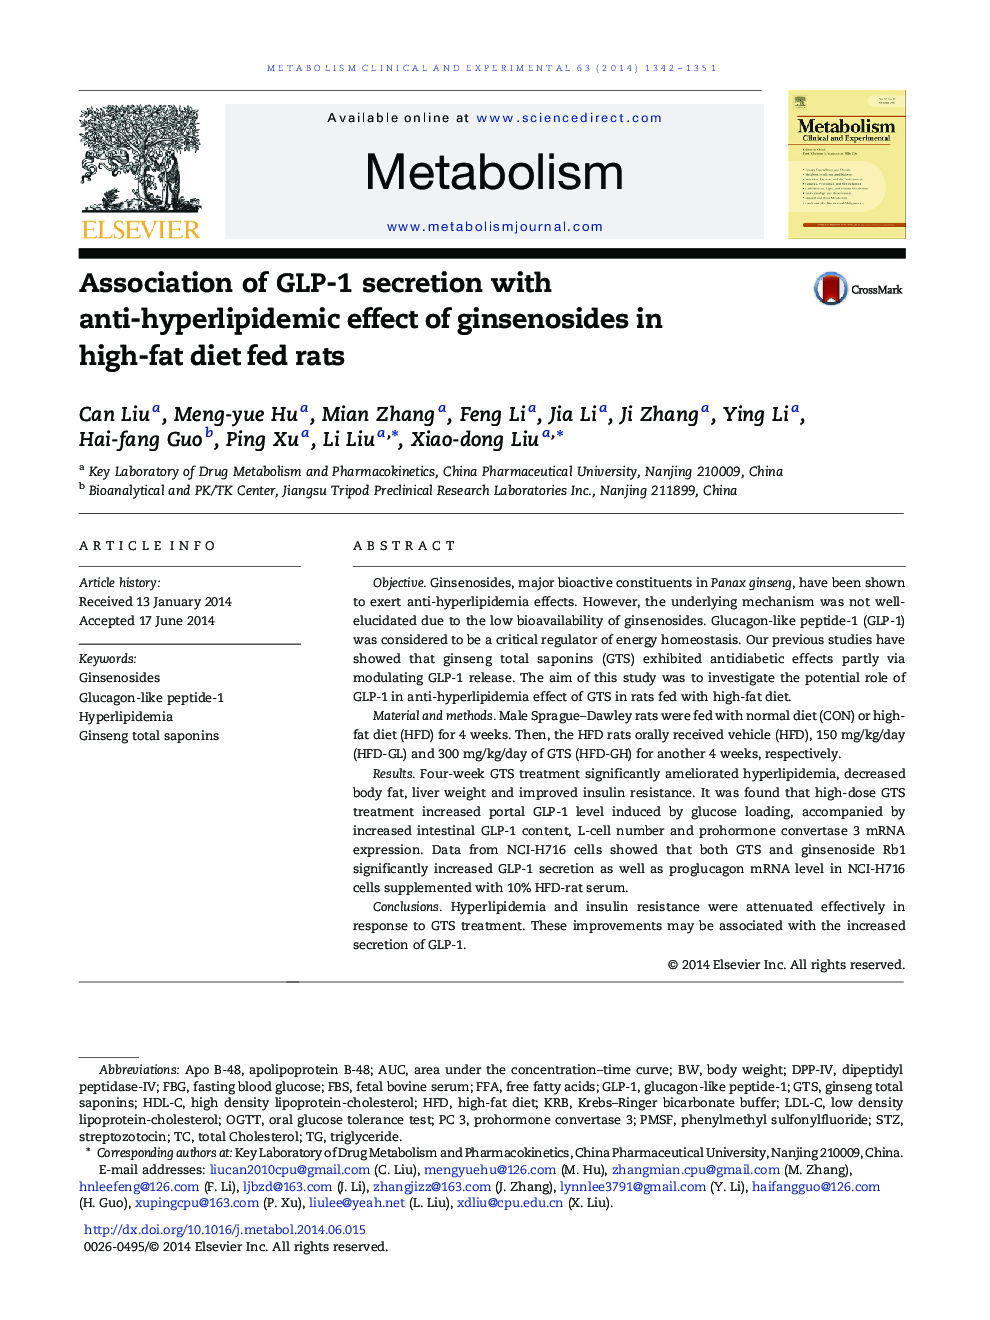 Association of GLP-1 secretion with anti-hyperlipidemic effect of ginsenosides in high-fat diet fed rats